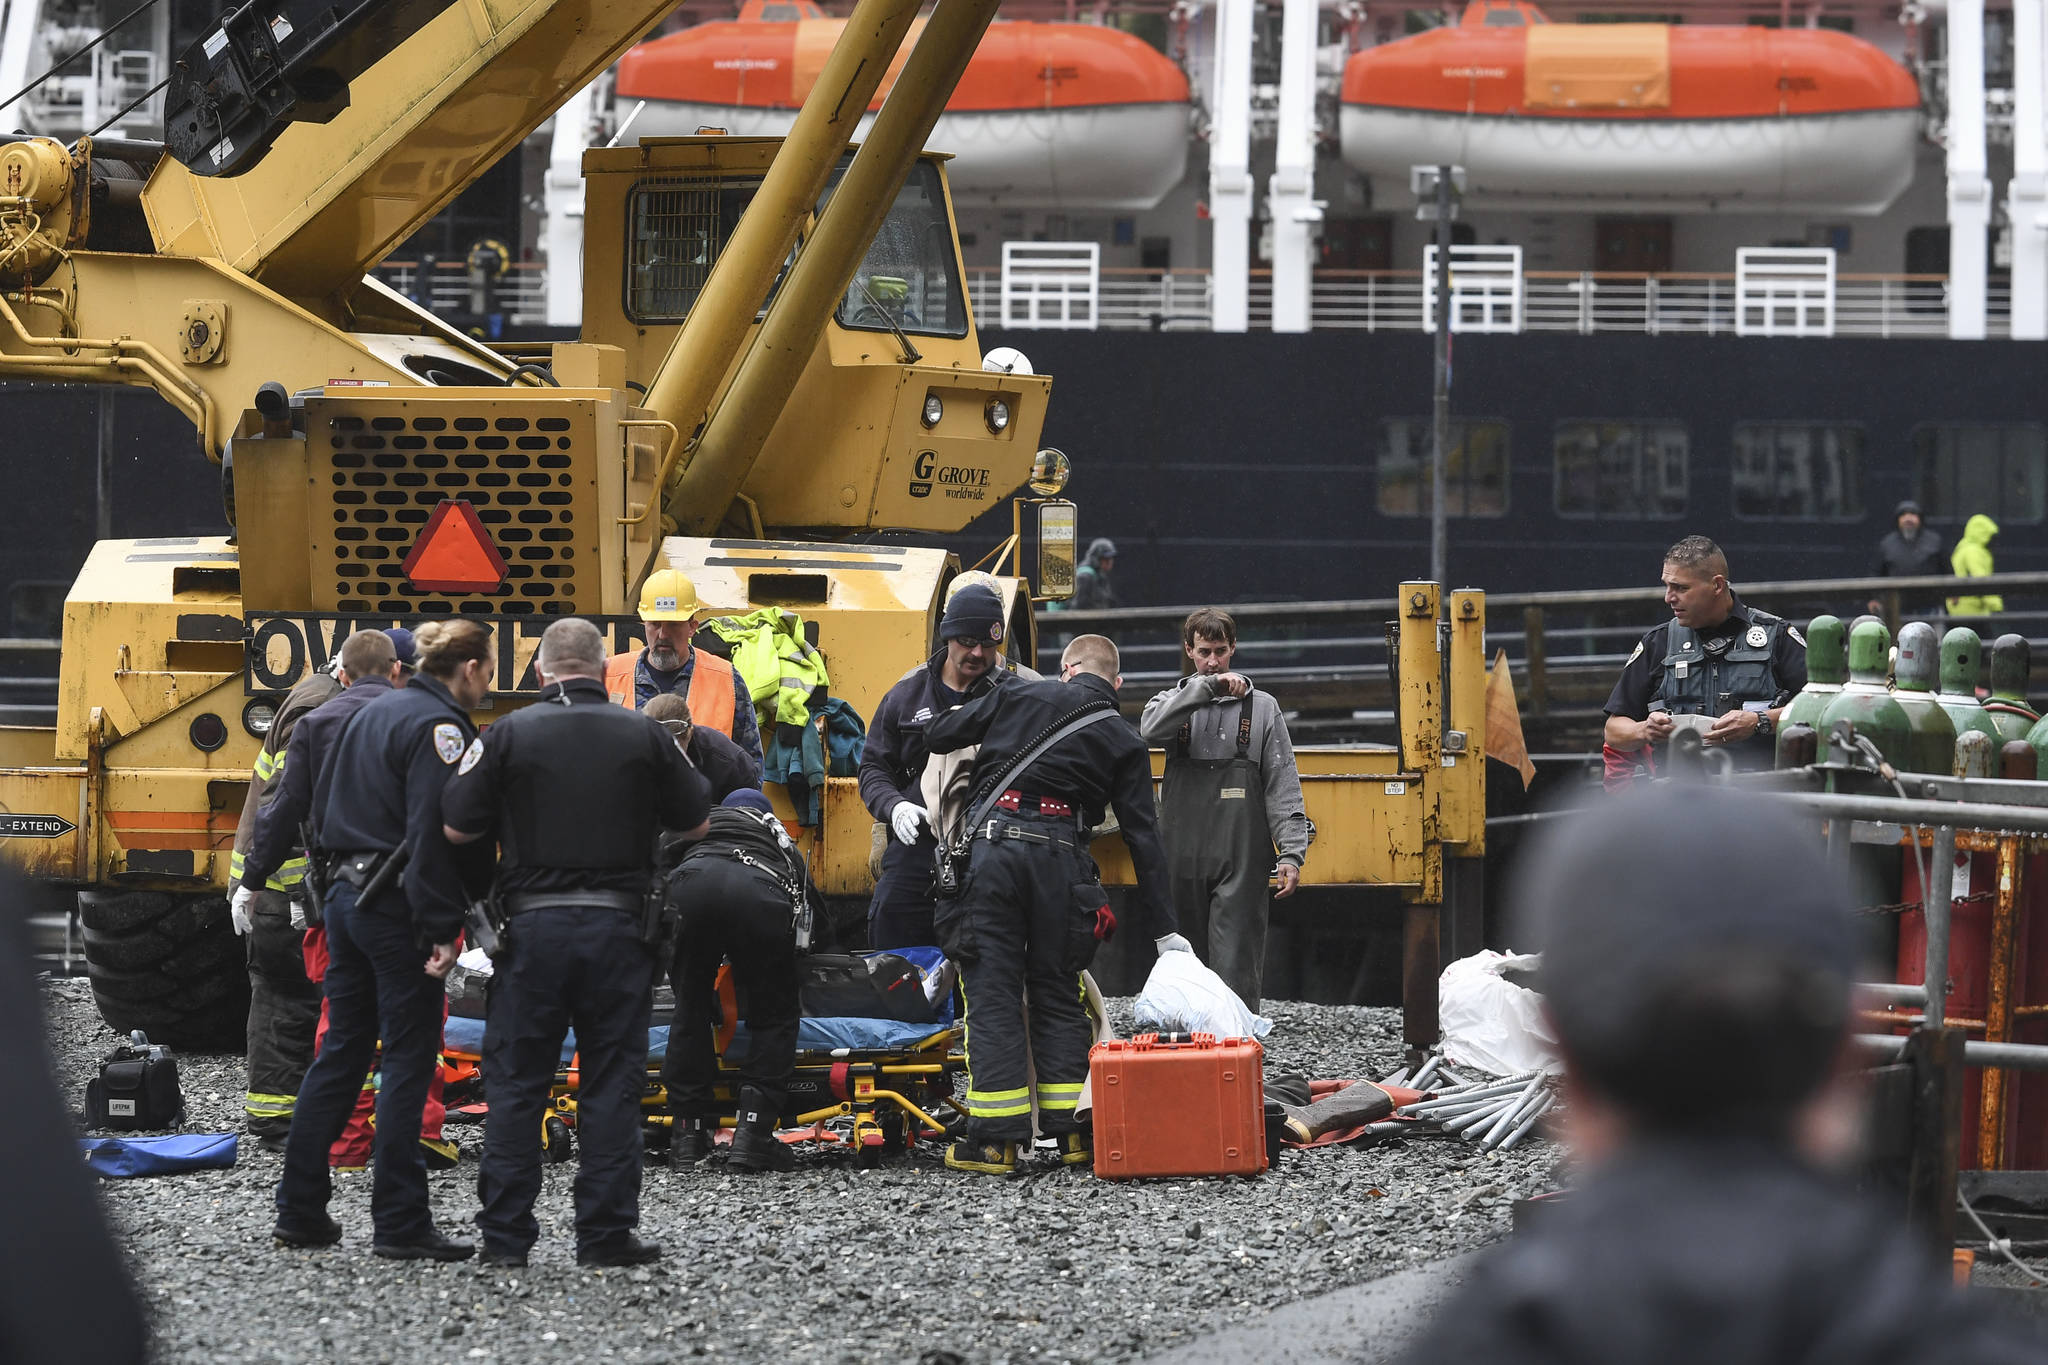 Juneau Police Department officers and Capital City Fire/Rescue personnel respond to an accident at the Downtown Public Library on Monday, Sept. 23, 2019. A construction worker was injured at a work site after a driver reportedly drove through the library parking barrier. (Michael Penn | Juneau Empire)